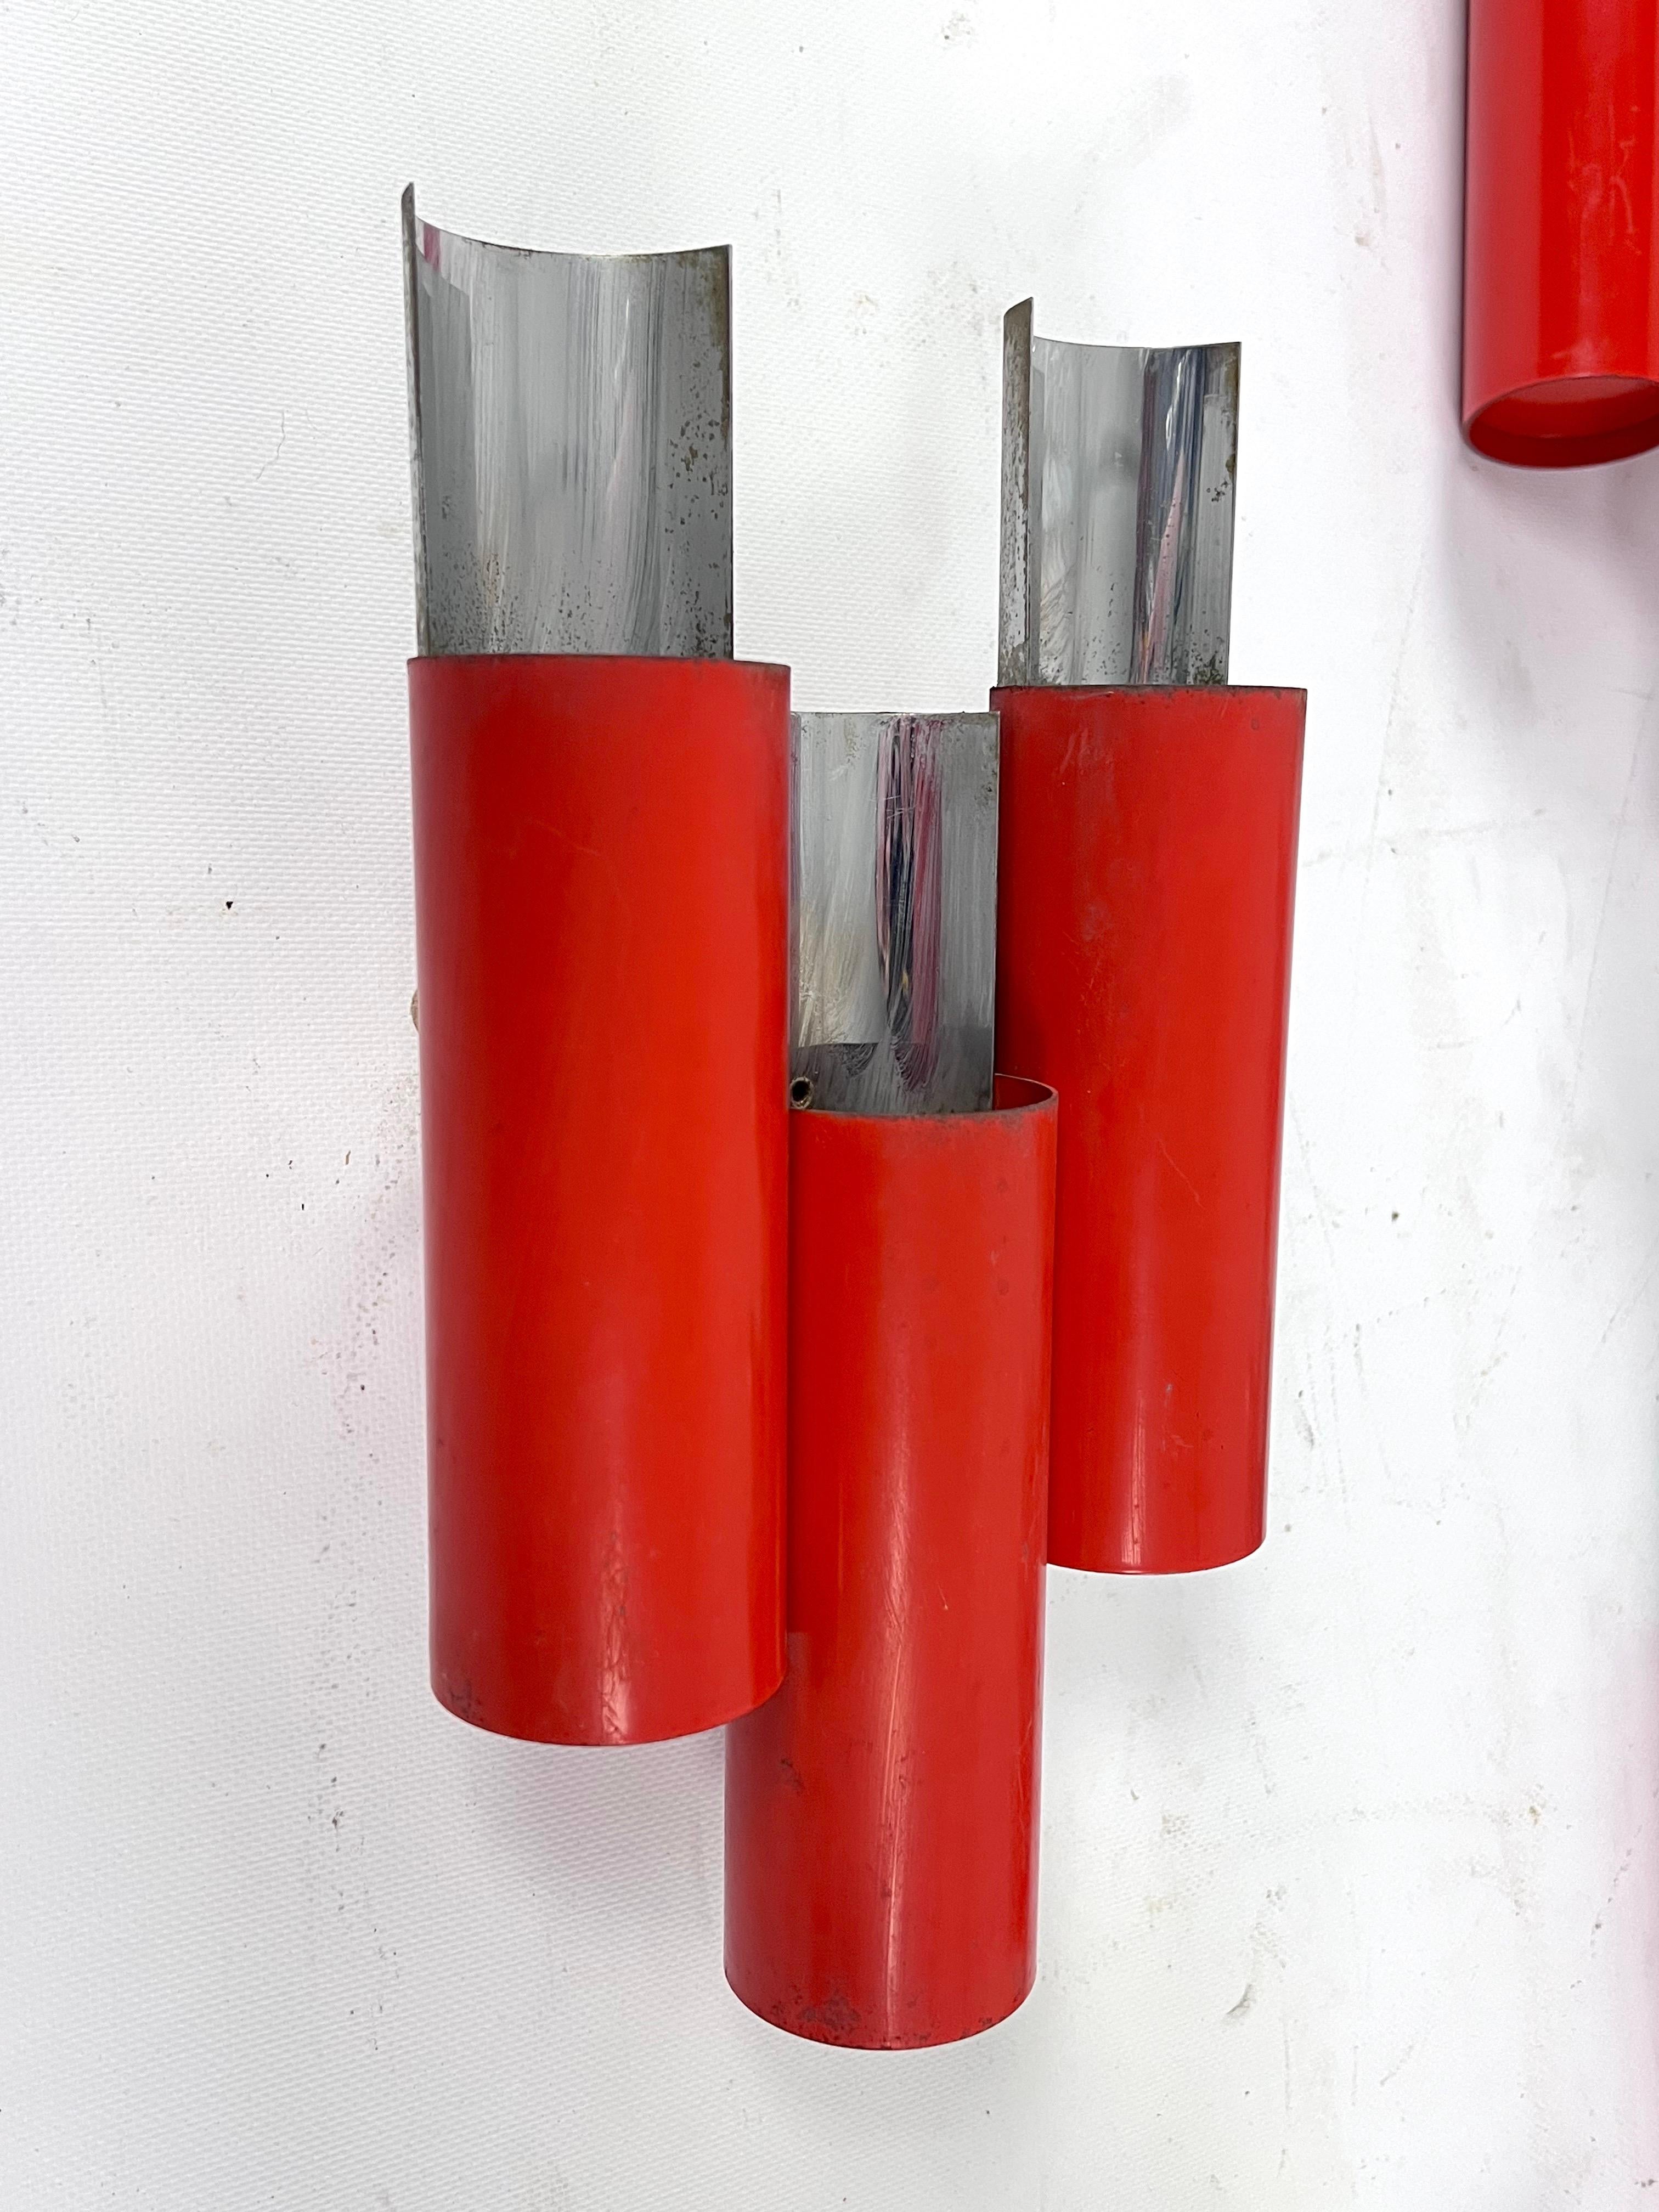 Rare Set of 10 Midcentury Red and Chrome Wall Lamps by Stilnovo, Italy, 1970s For Sale 7